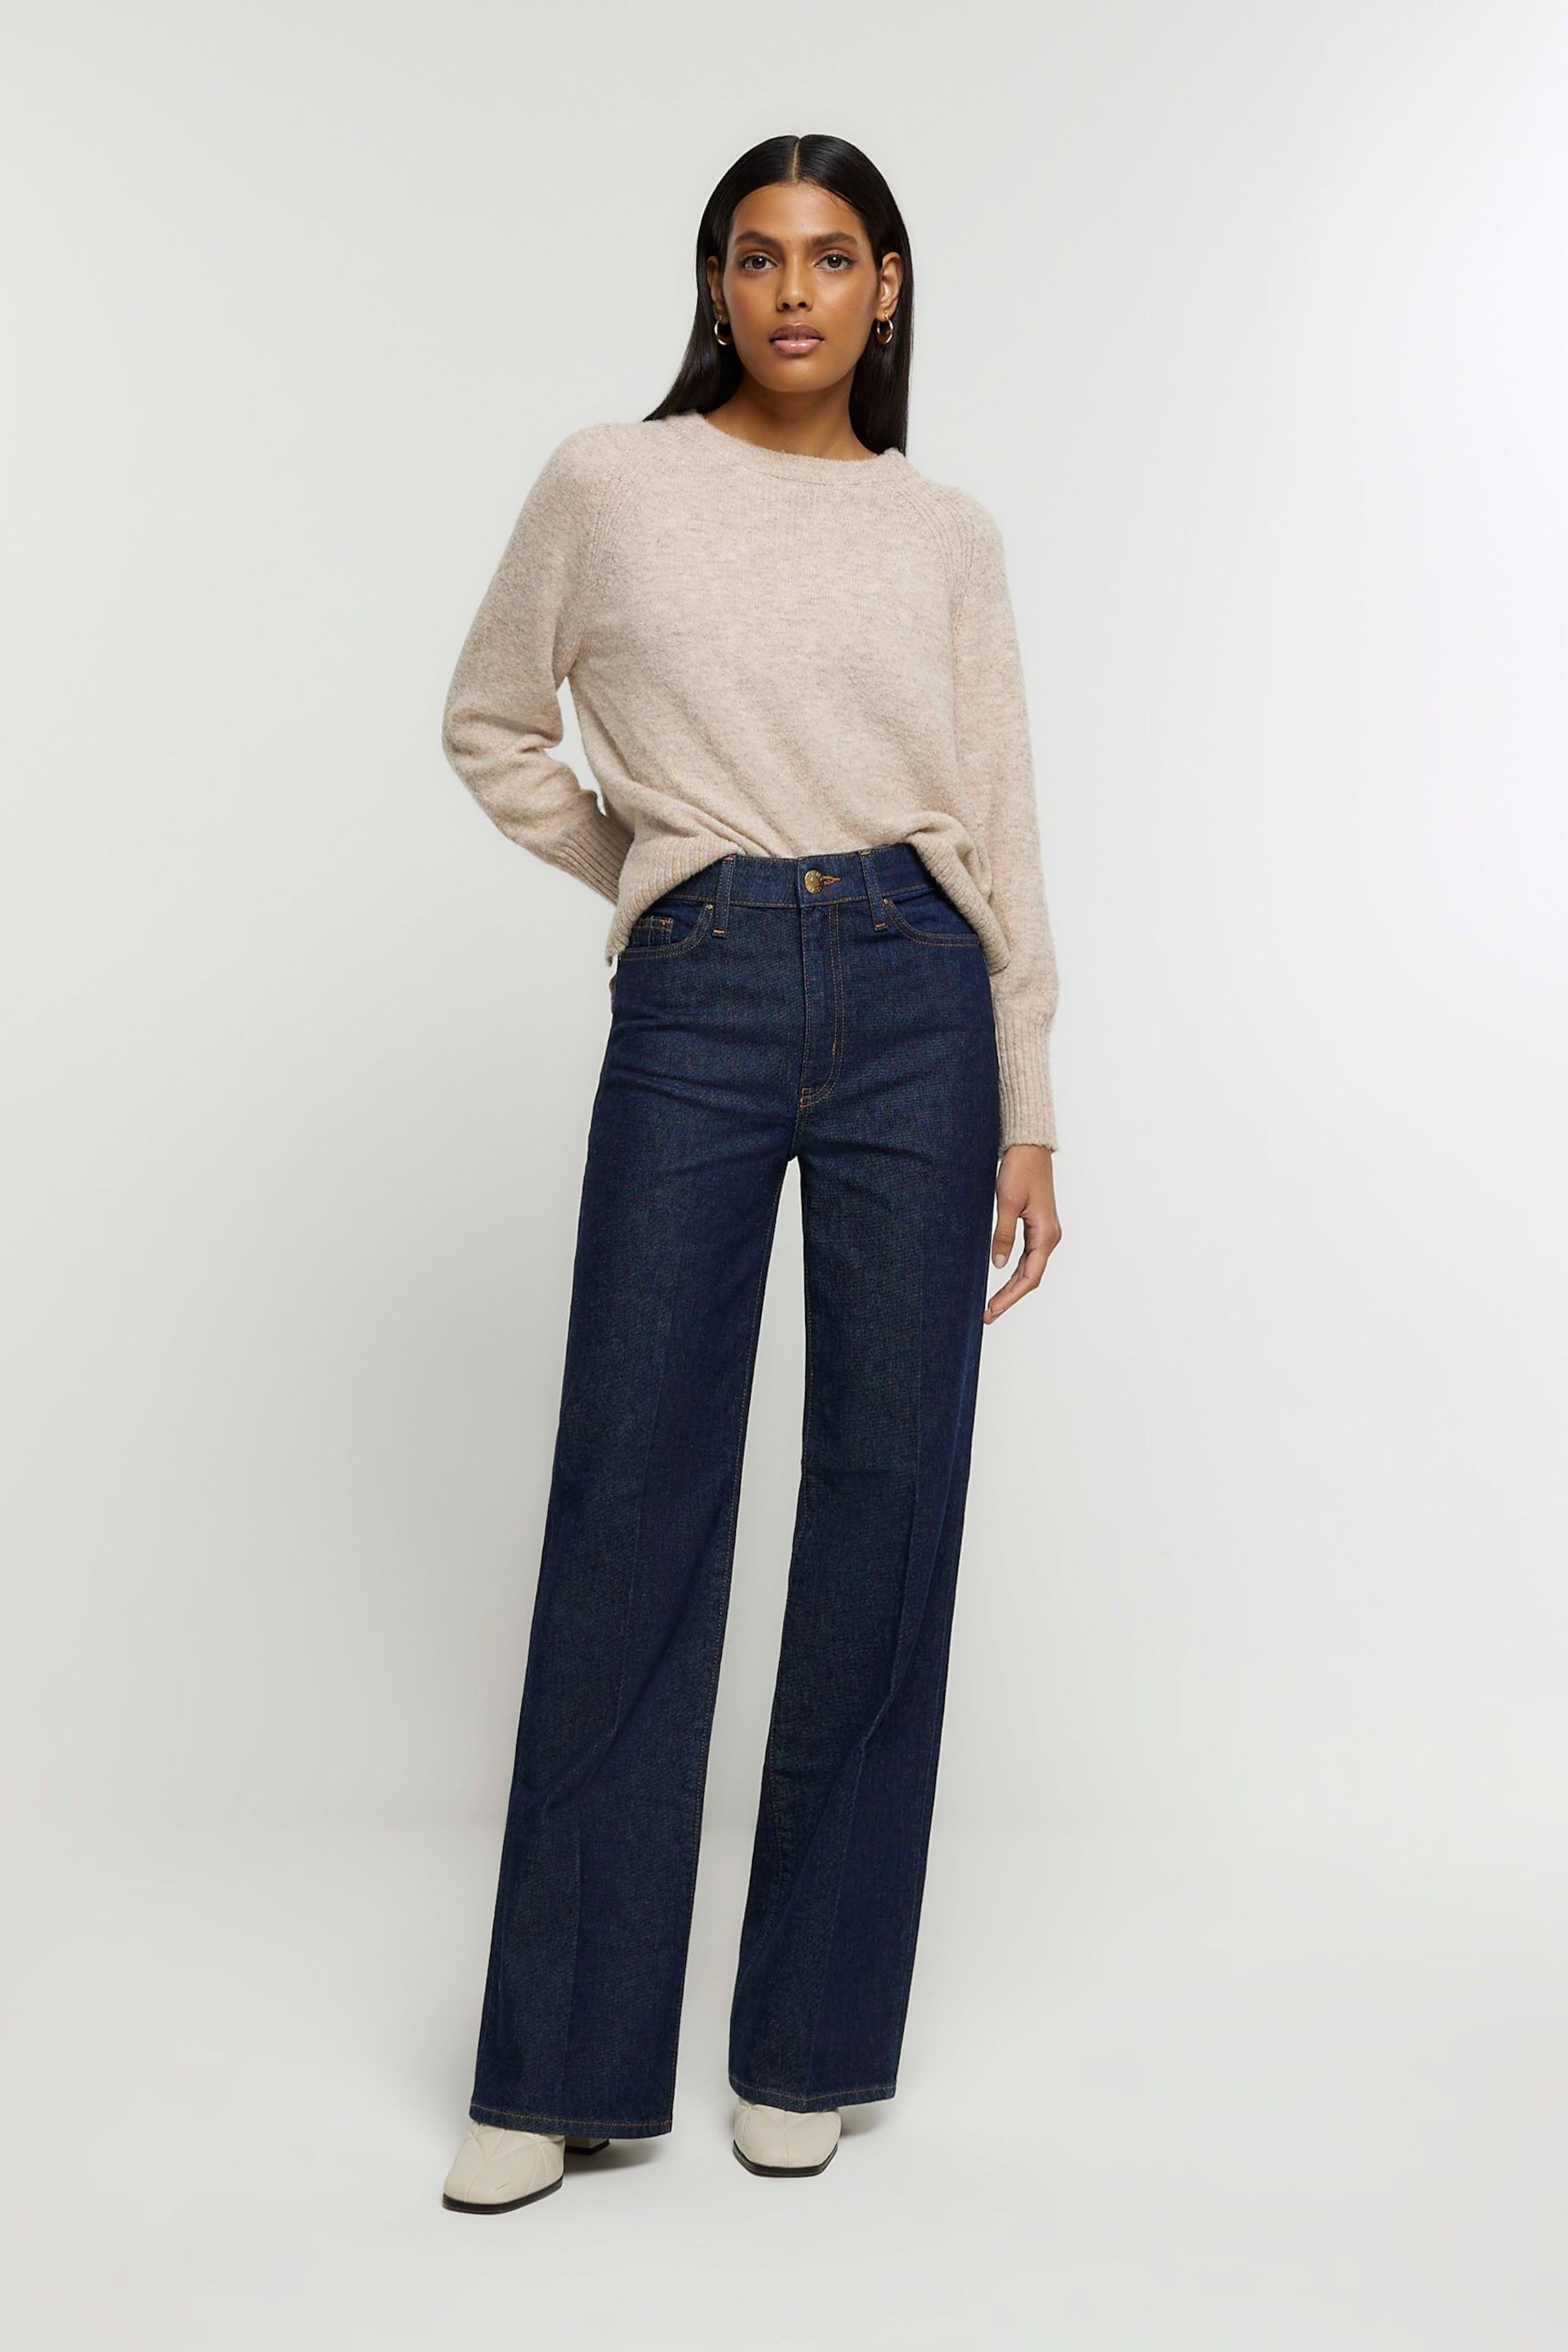 River Island Blue High Rise Wide Leg Jeans - Image 1 of 5